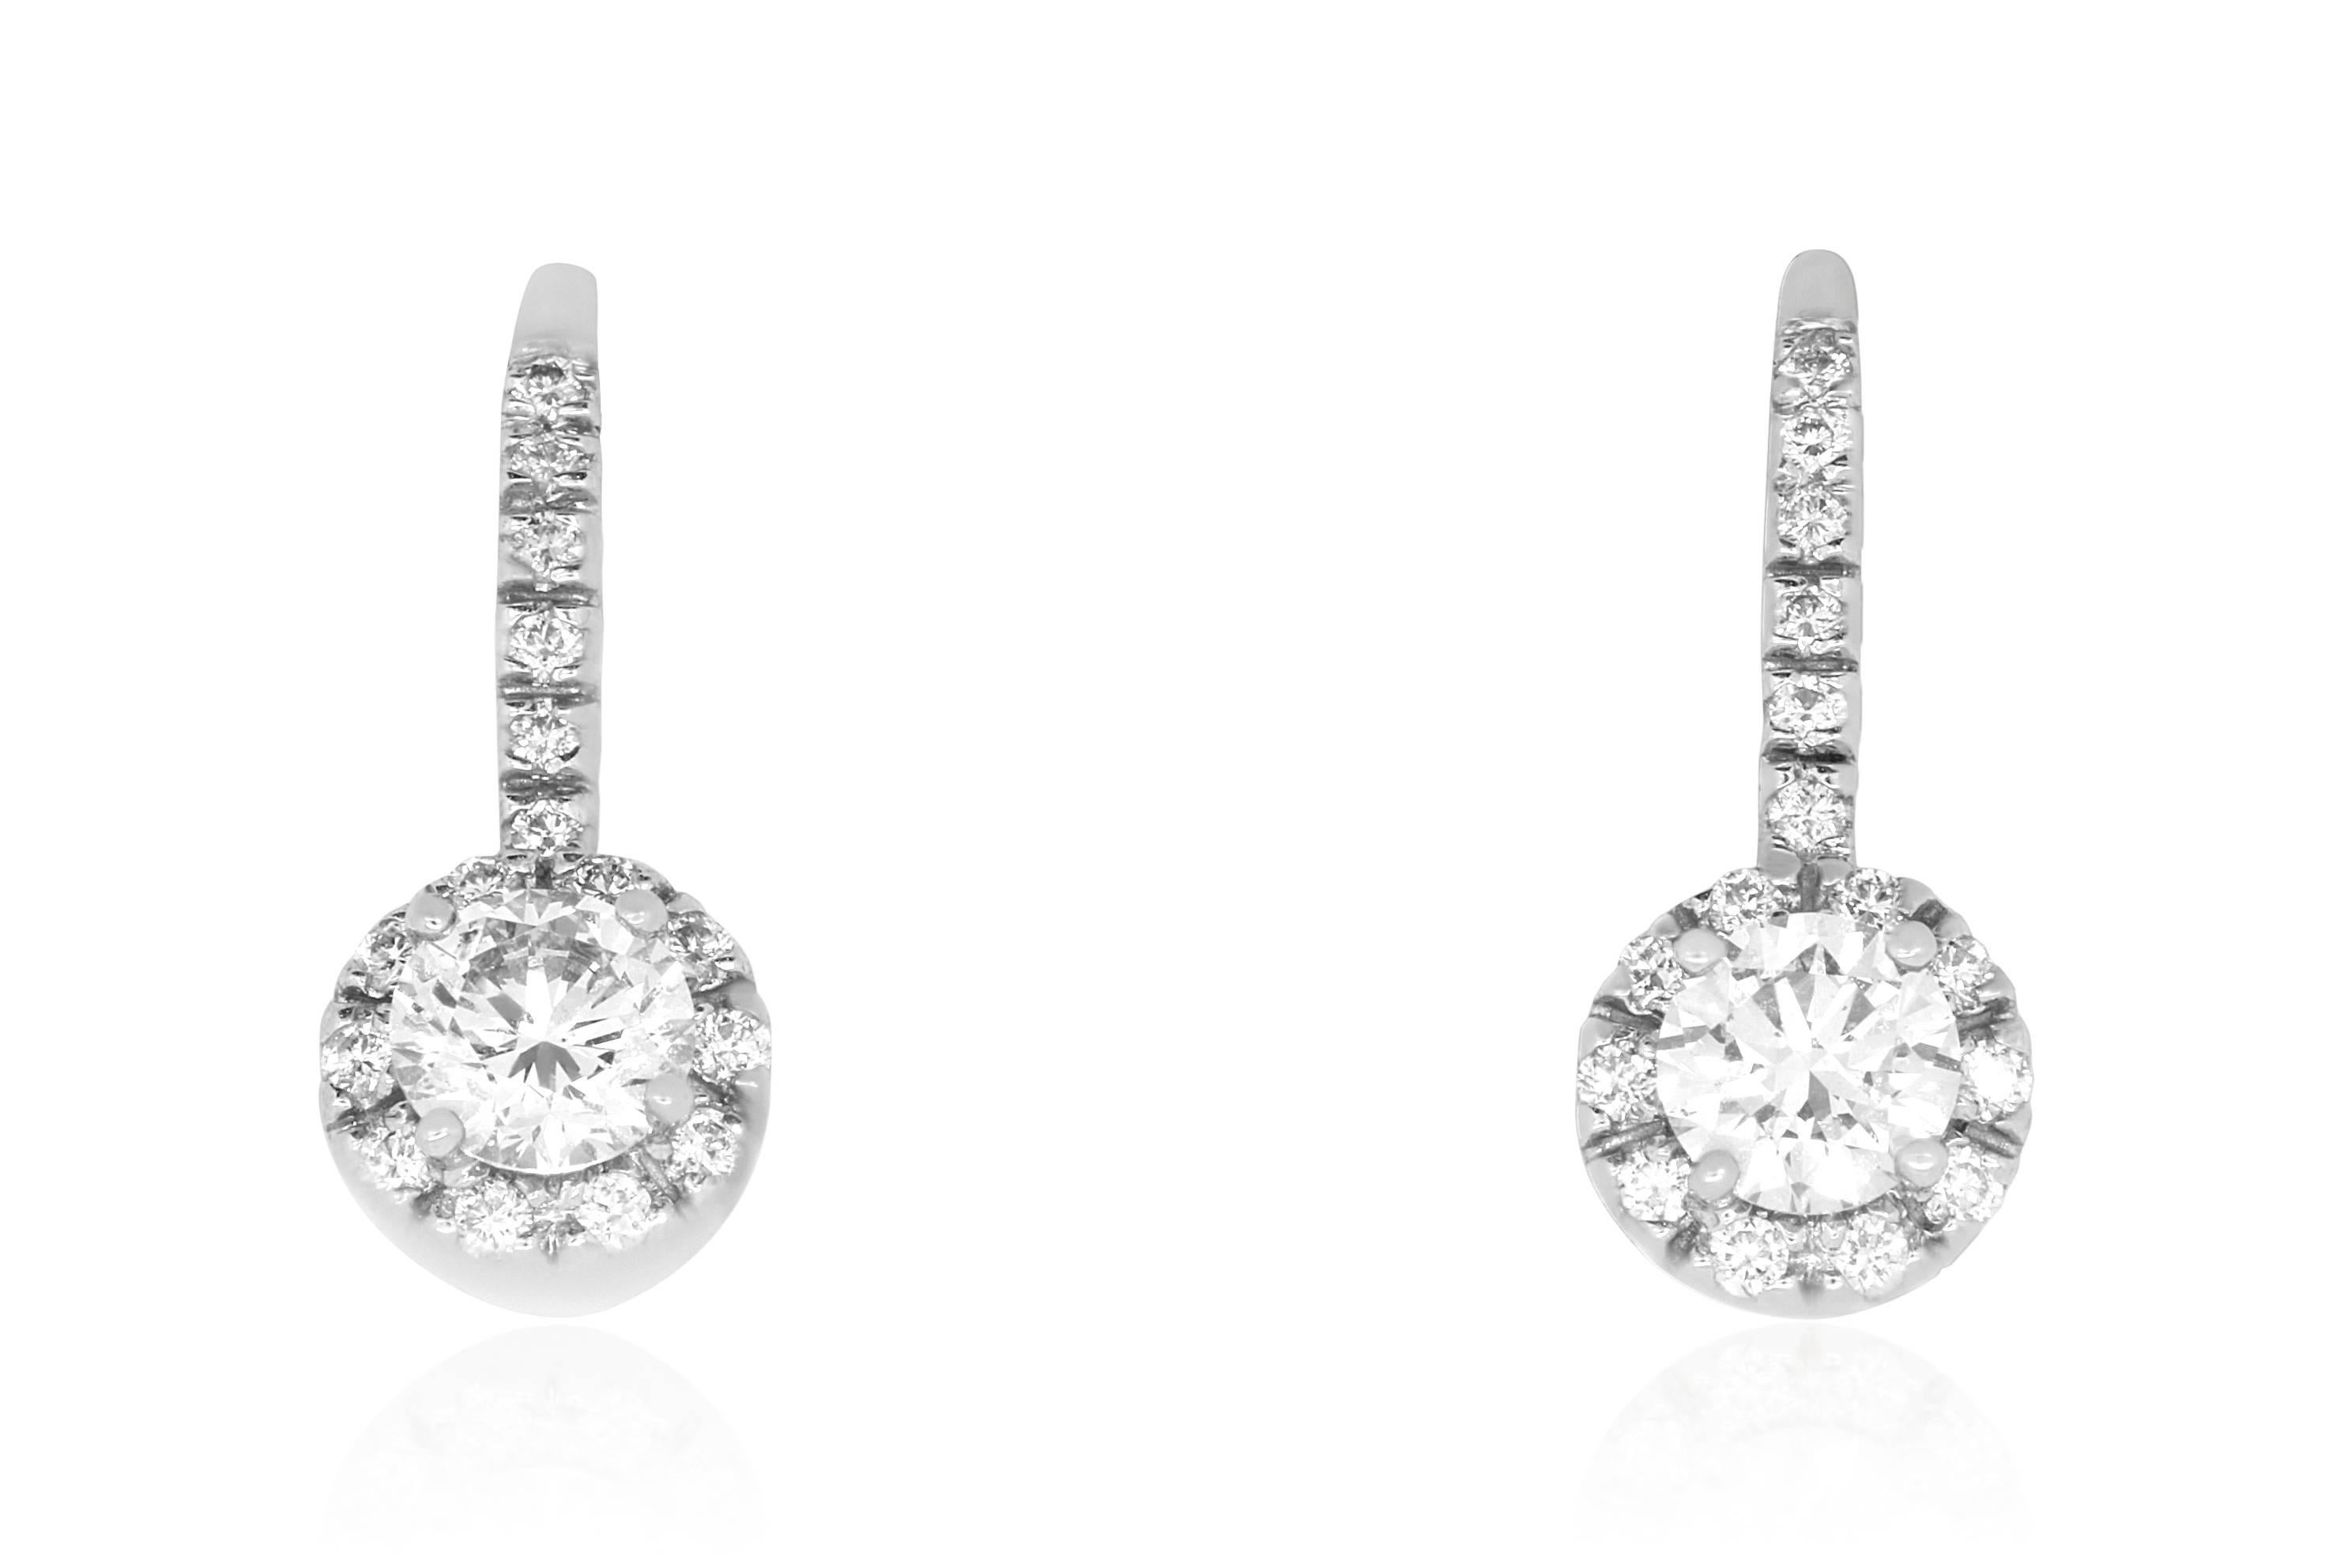 Add some sparkle to any look with these dainty 14k White Gold drop earrings. Featuring a 0.62 Carat Brilliant White Diamond surrounded by 48 Round Diamonds, these will surely become you're favorite pair of earrings! 

Material: 14k White Gold 
Stone